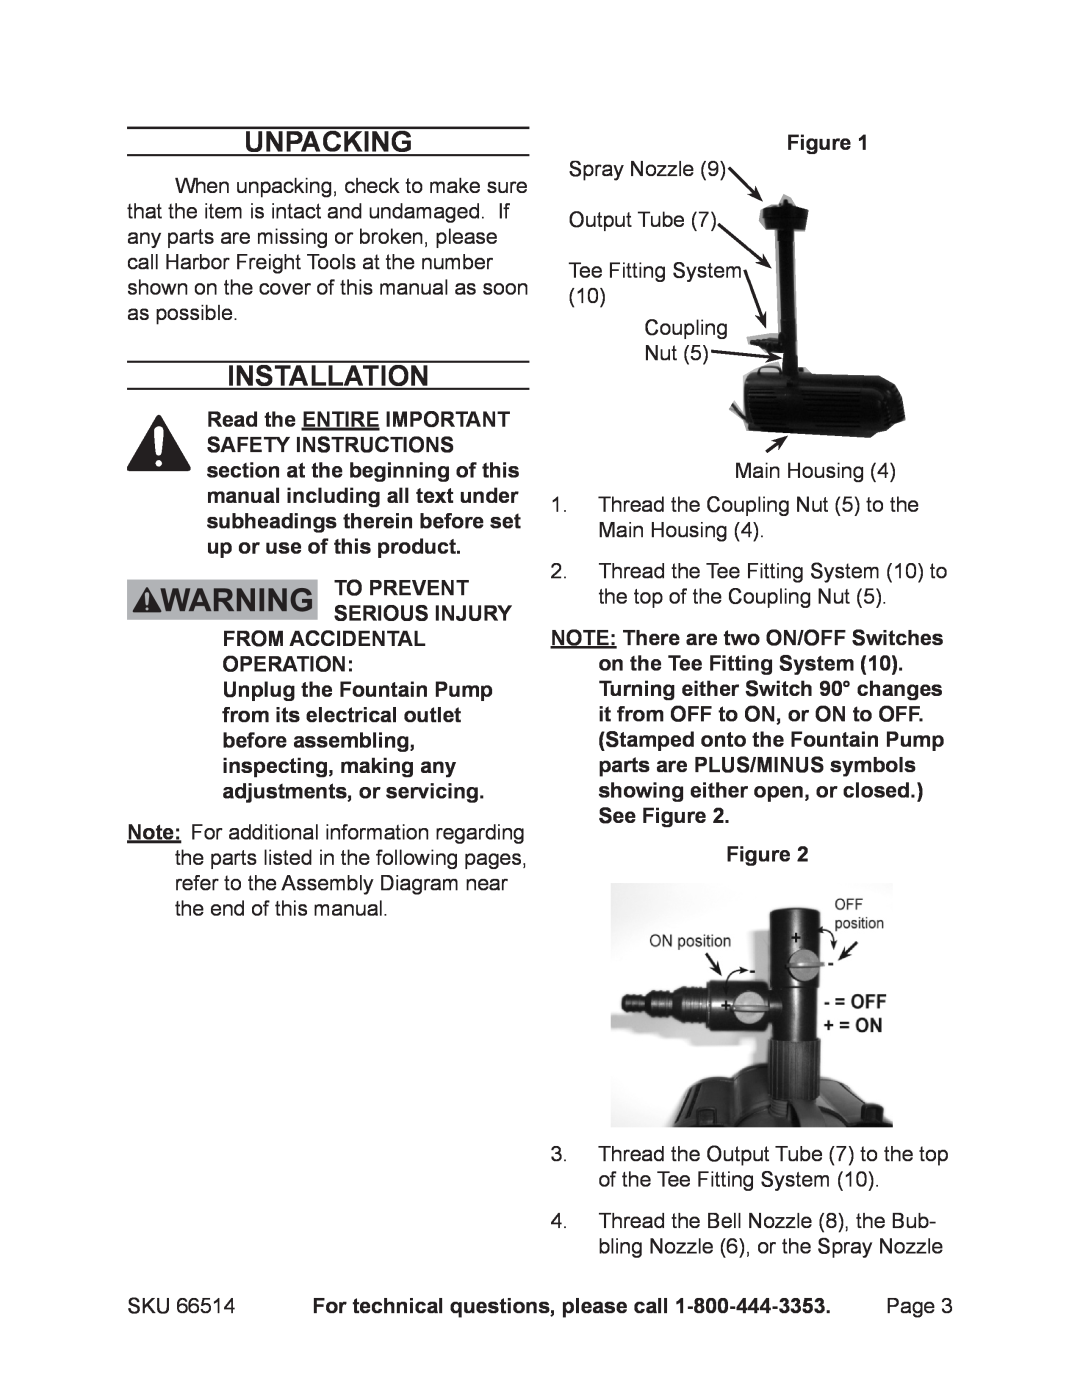 Harbor Freight Tools 66514 manual Unpacking, Installation, To prevent serious injury from accidental operation 